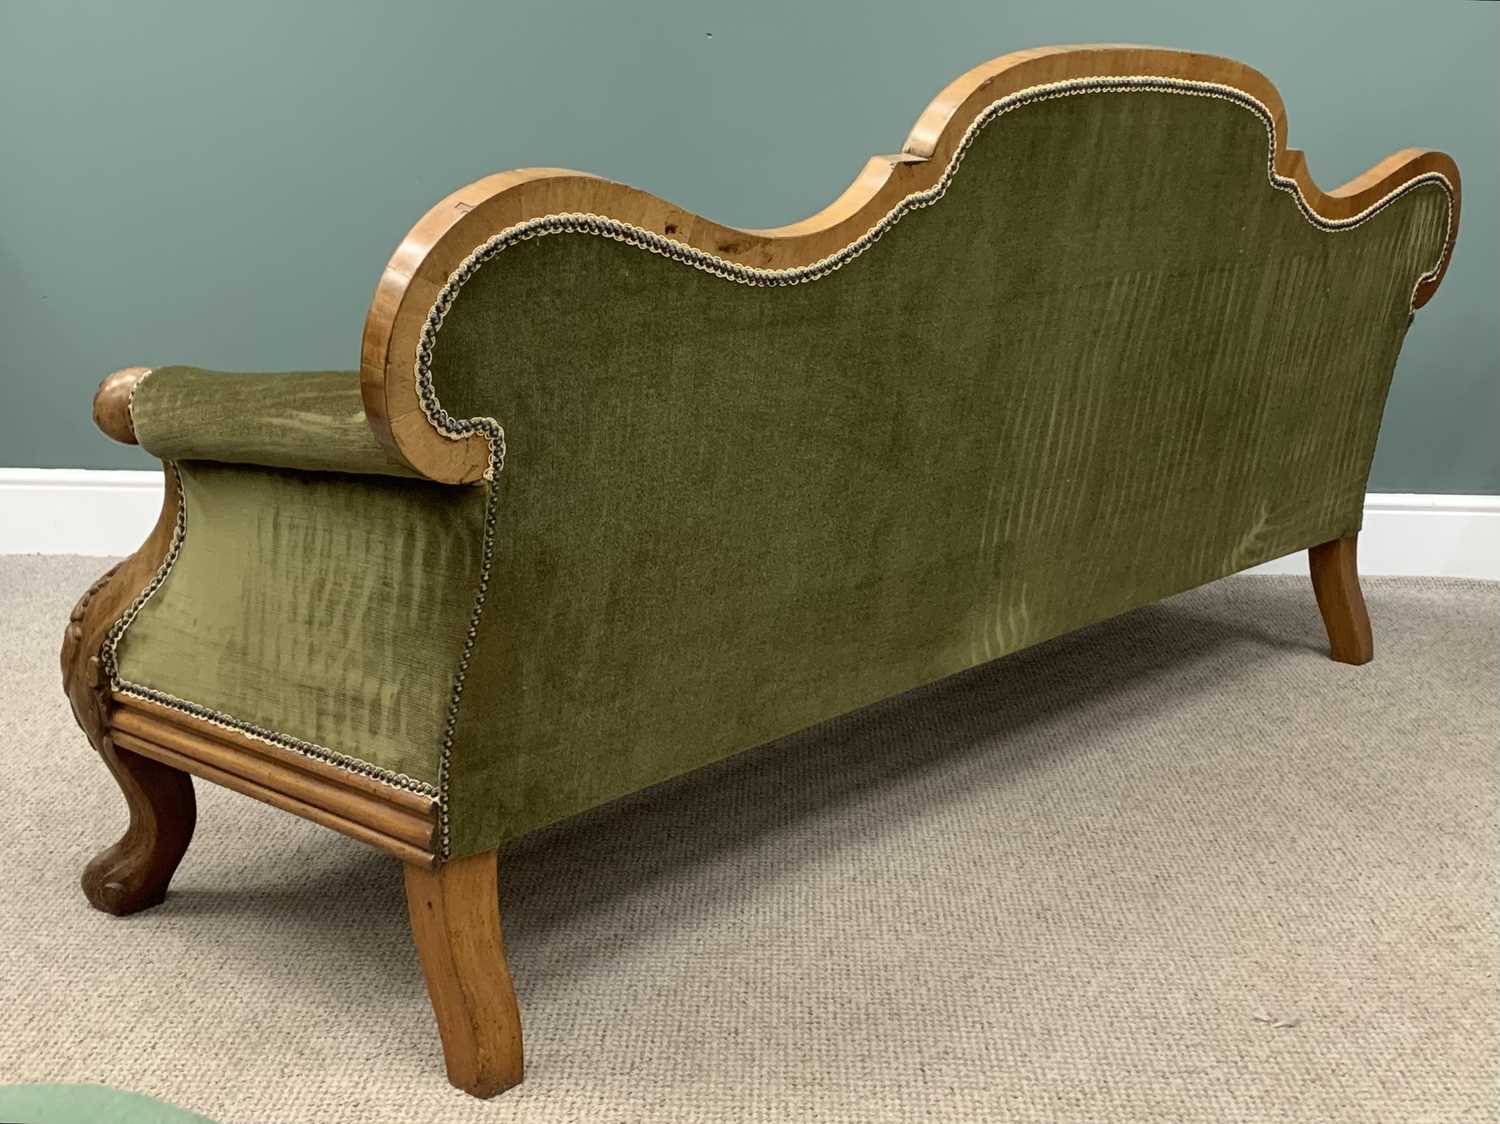 FINE ANTIQUE CARVED WALNUT SOFA with shaped back, on cabriole supports, green dralon upholstery, - Image 2 of 3